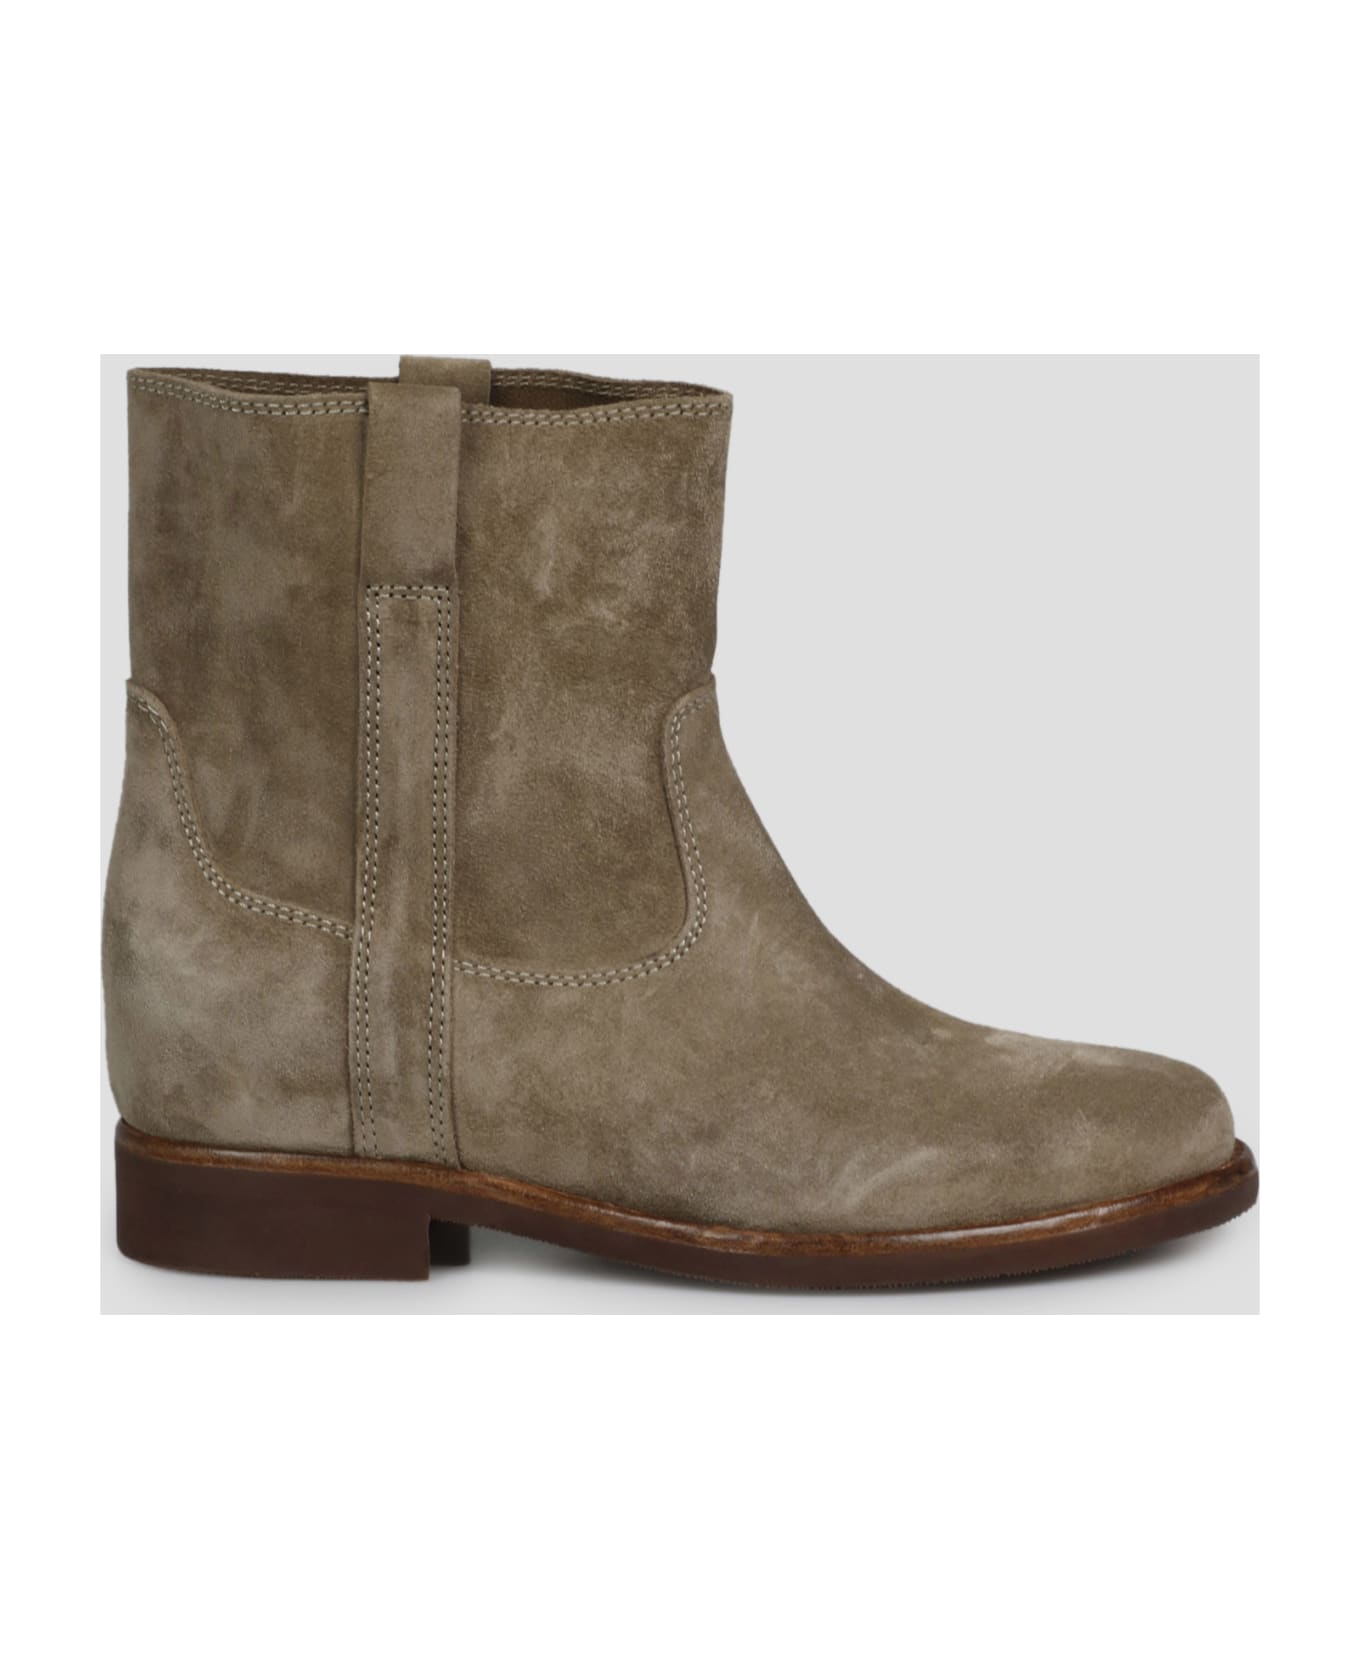 Isabel Marant Suede Ankle Boots - Tortora